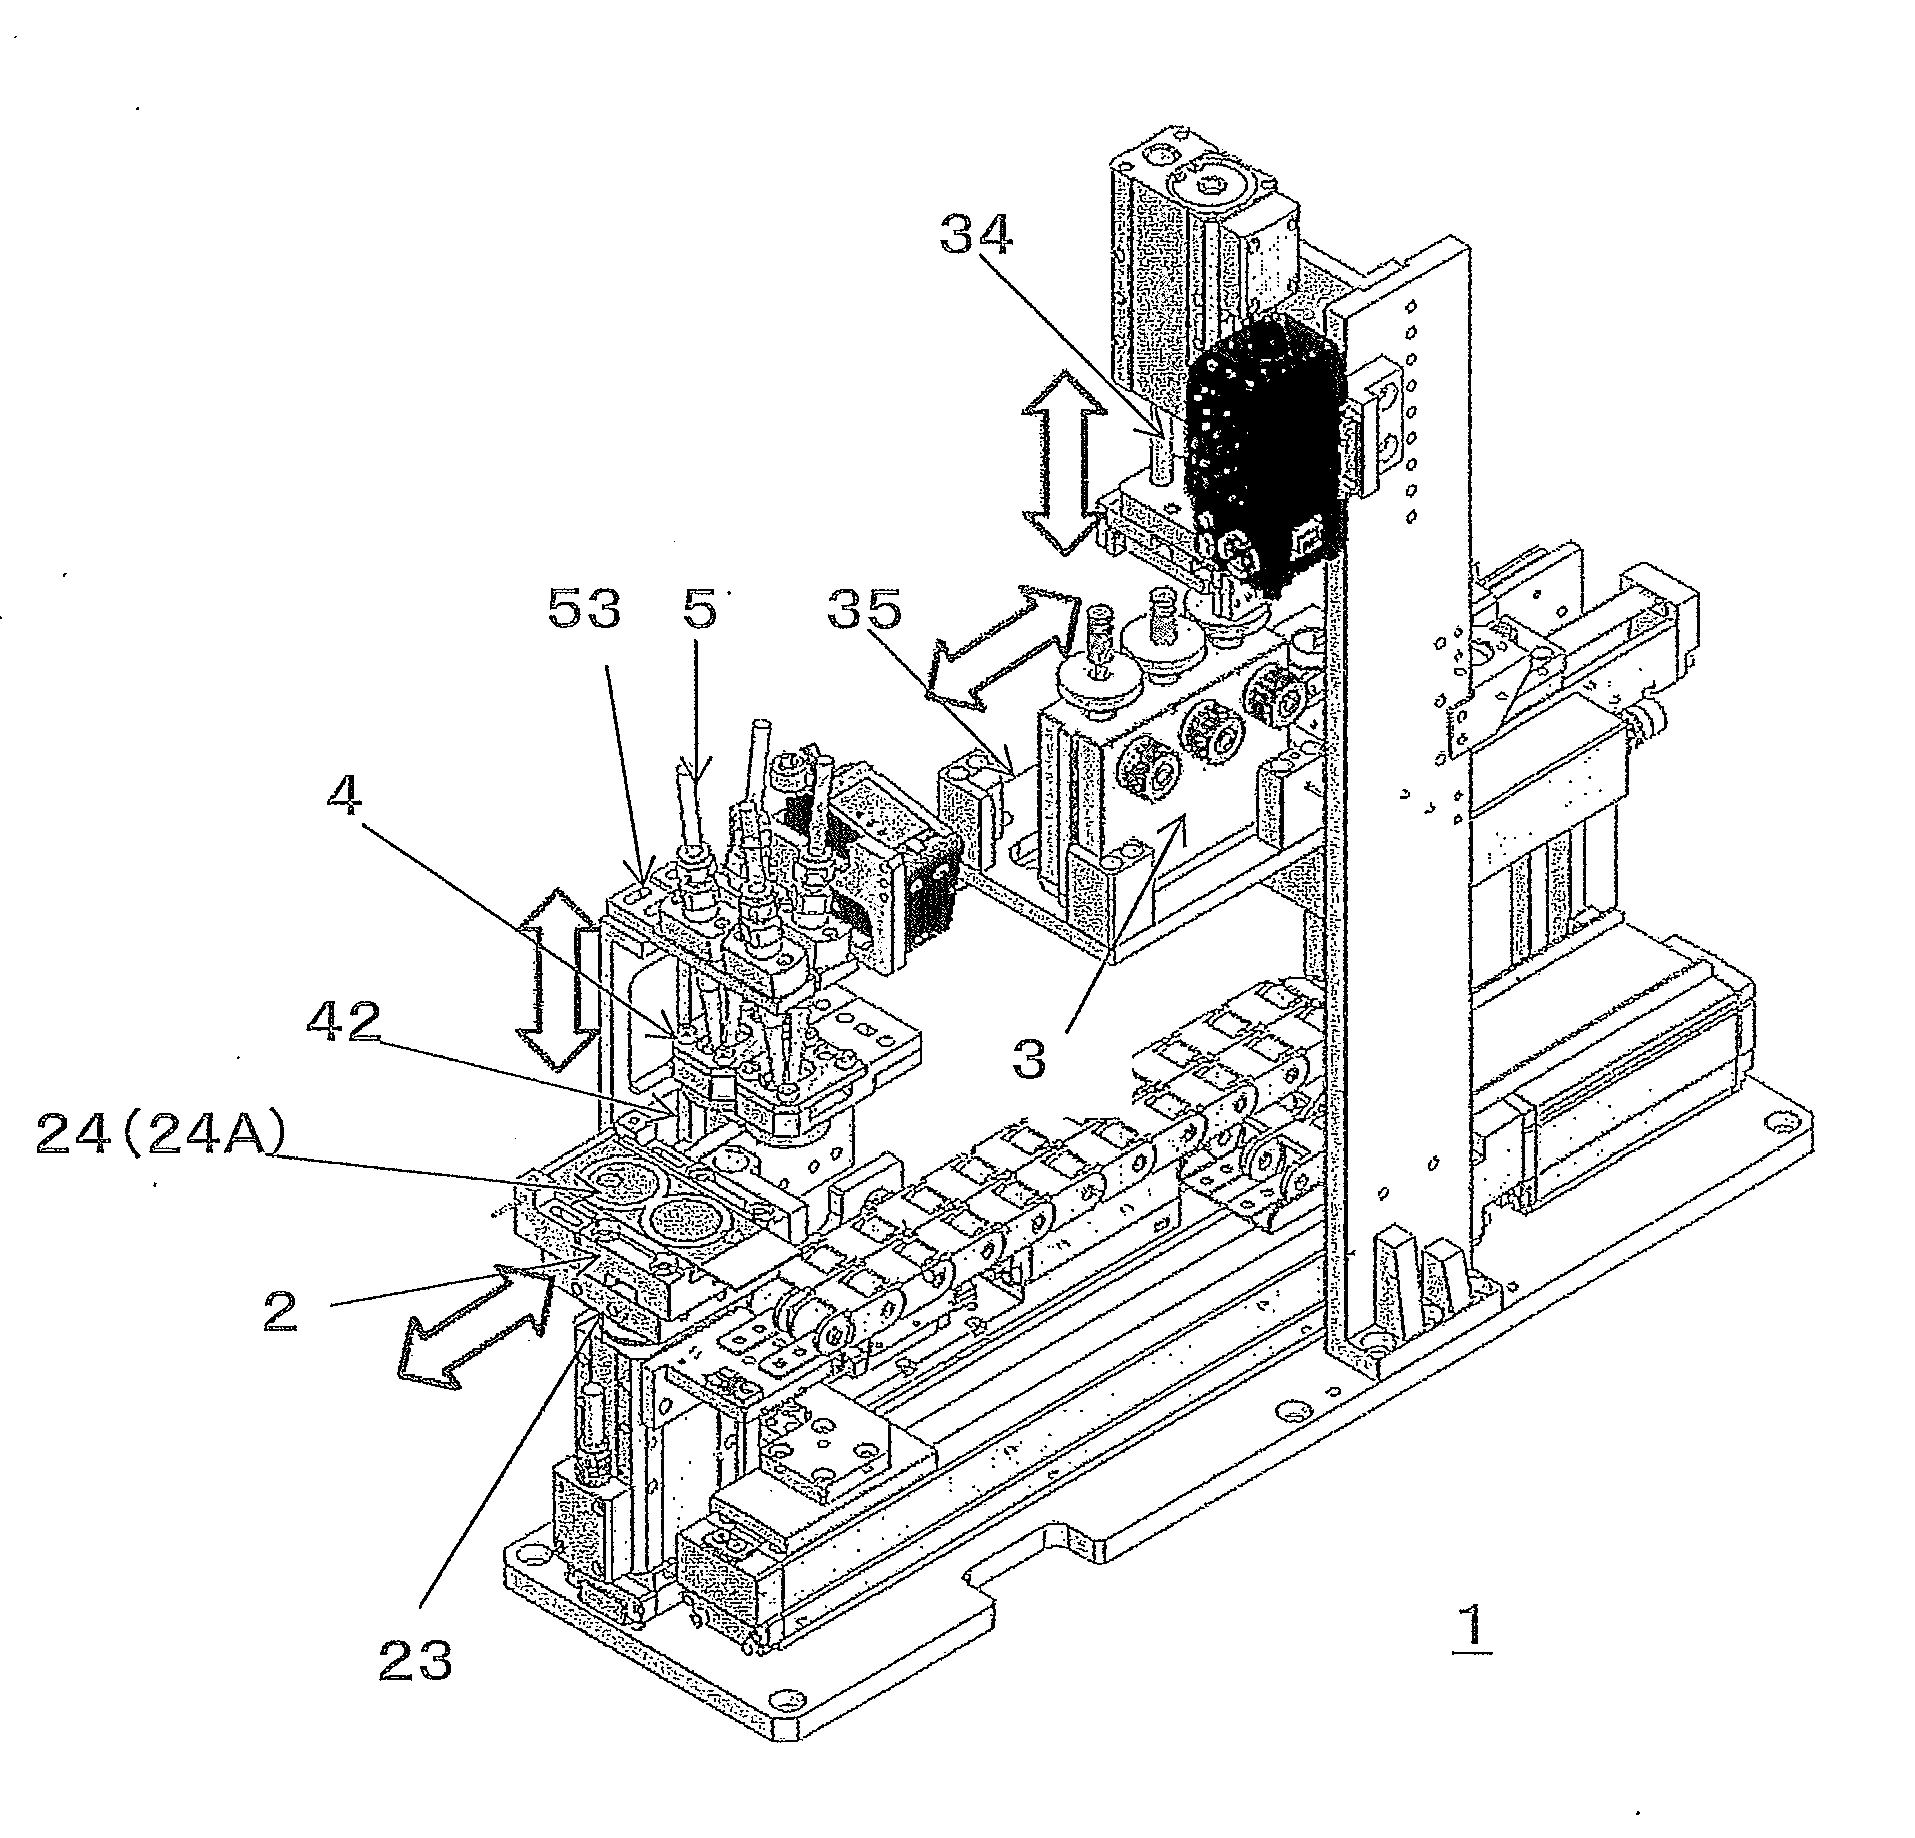 Apparatus for automatic electric field immunohistochemical staining and method for automatic electric field immunohistochemical staining